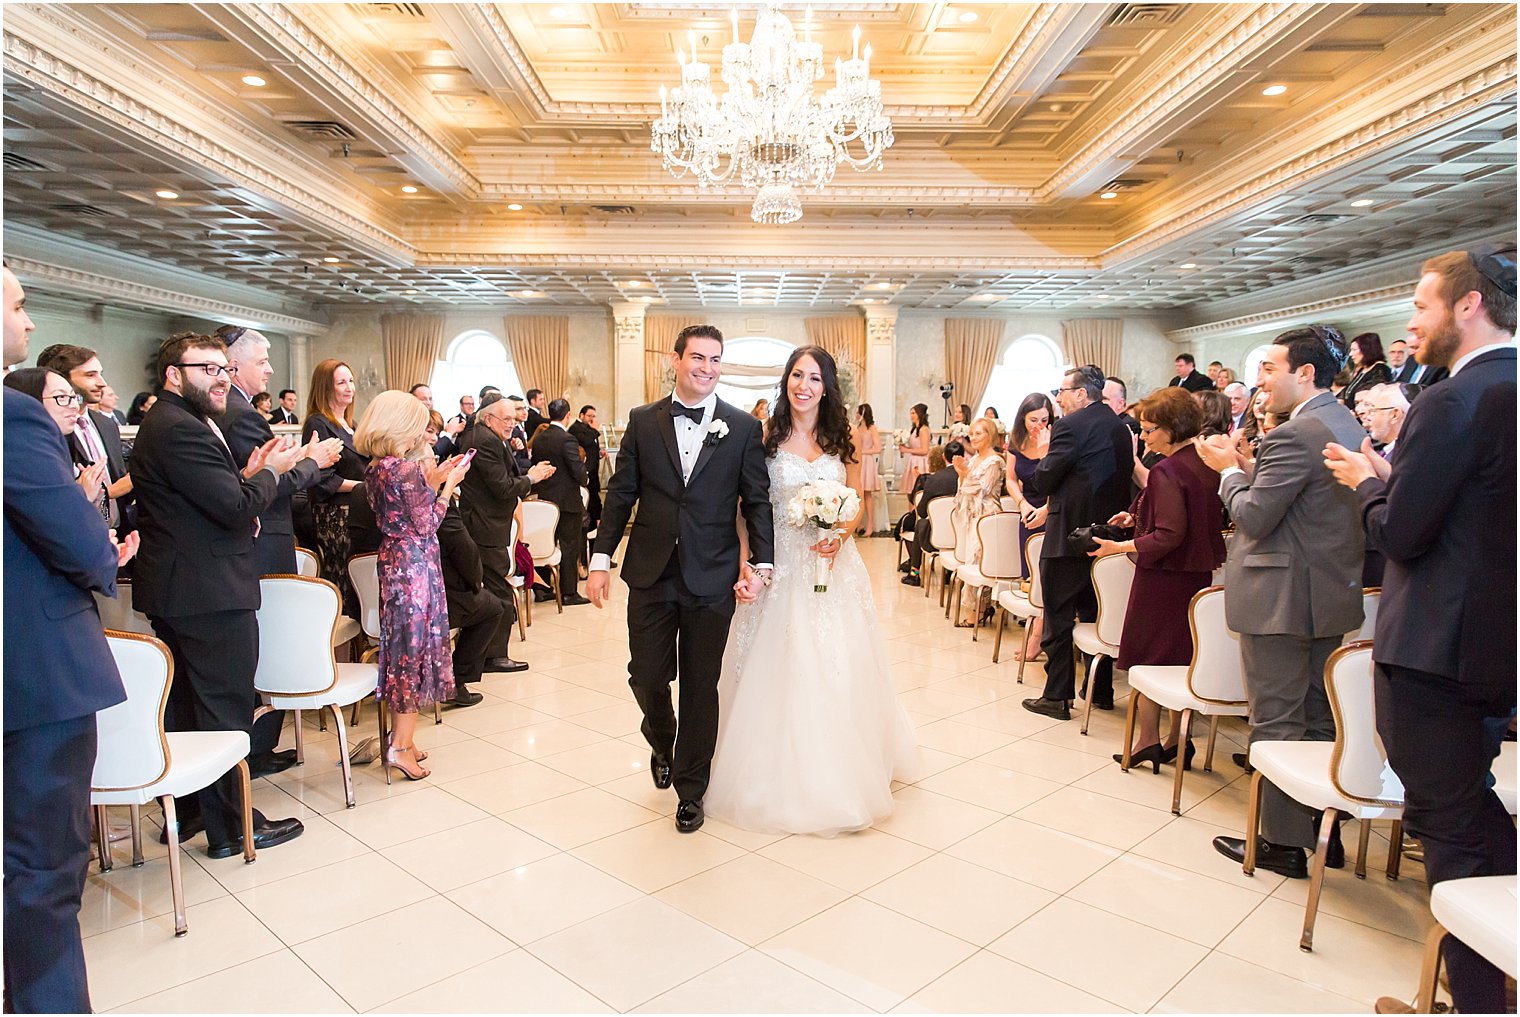 Bride and groom recessional | Photo by Idalia Photography